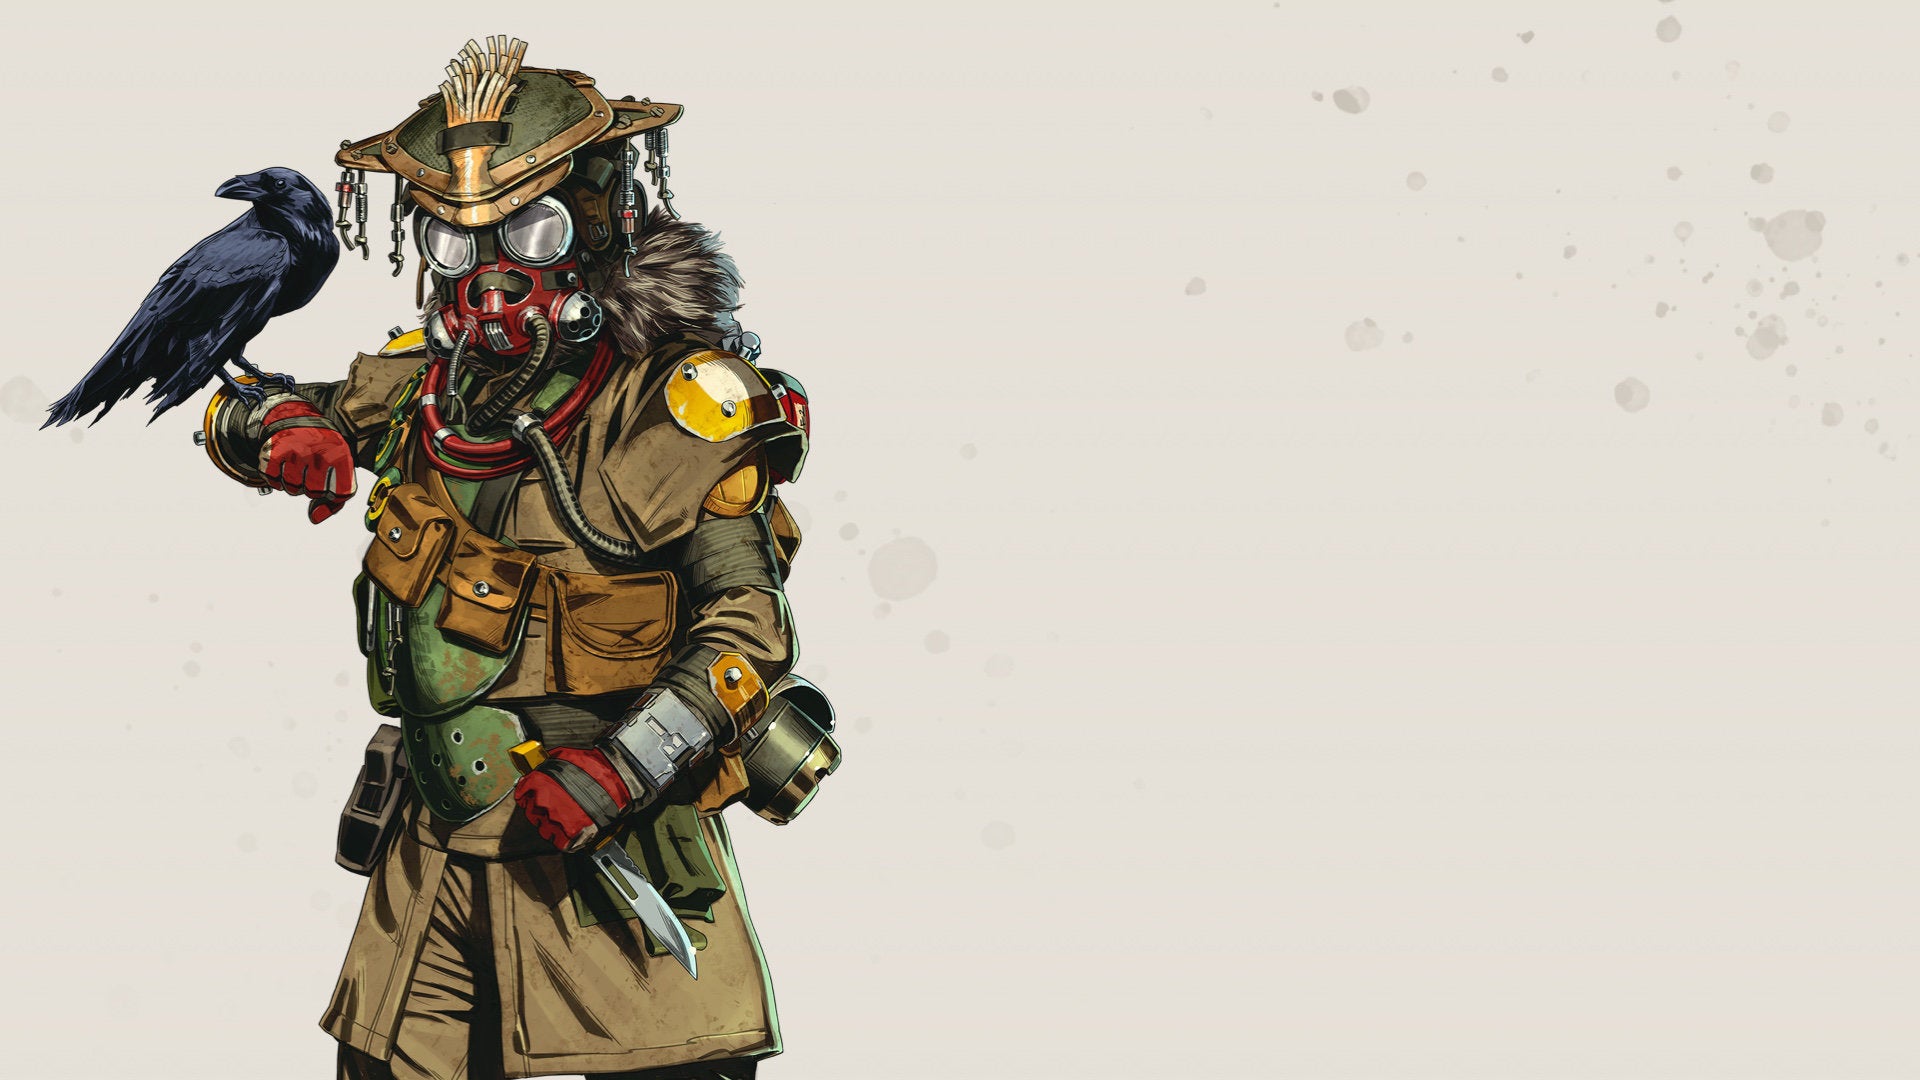 Official art of Bloodhound, one of the Apex Legends characters.